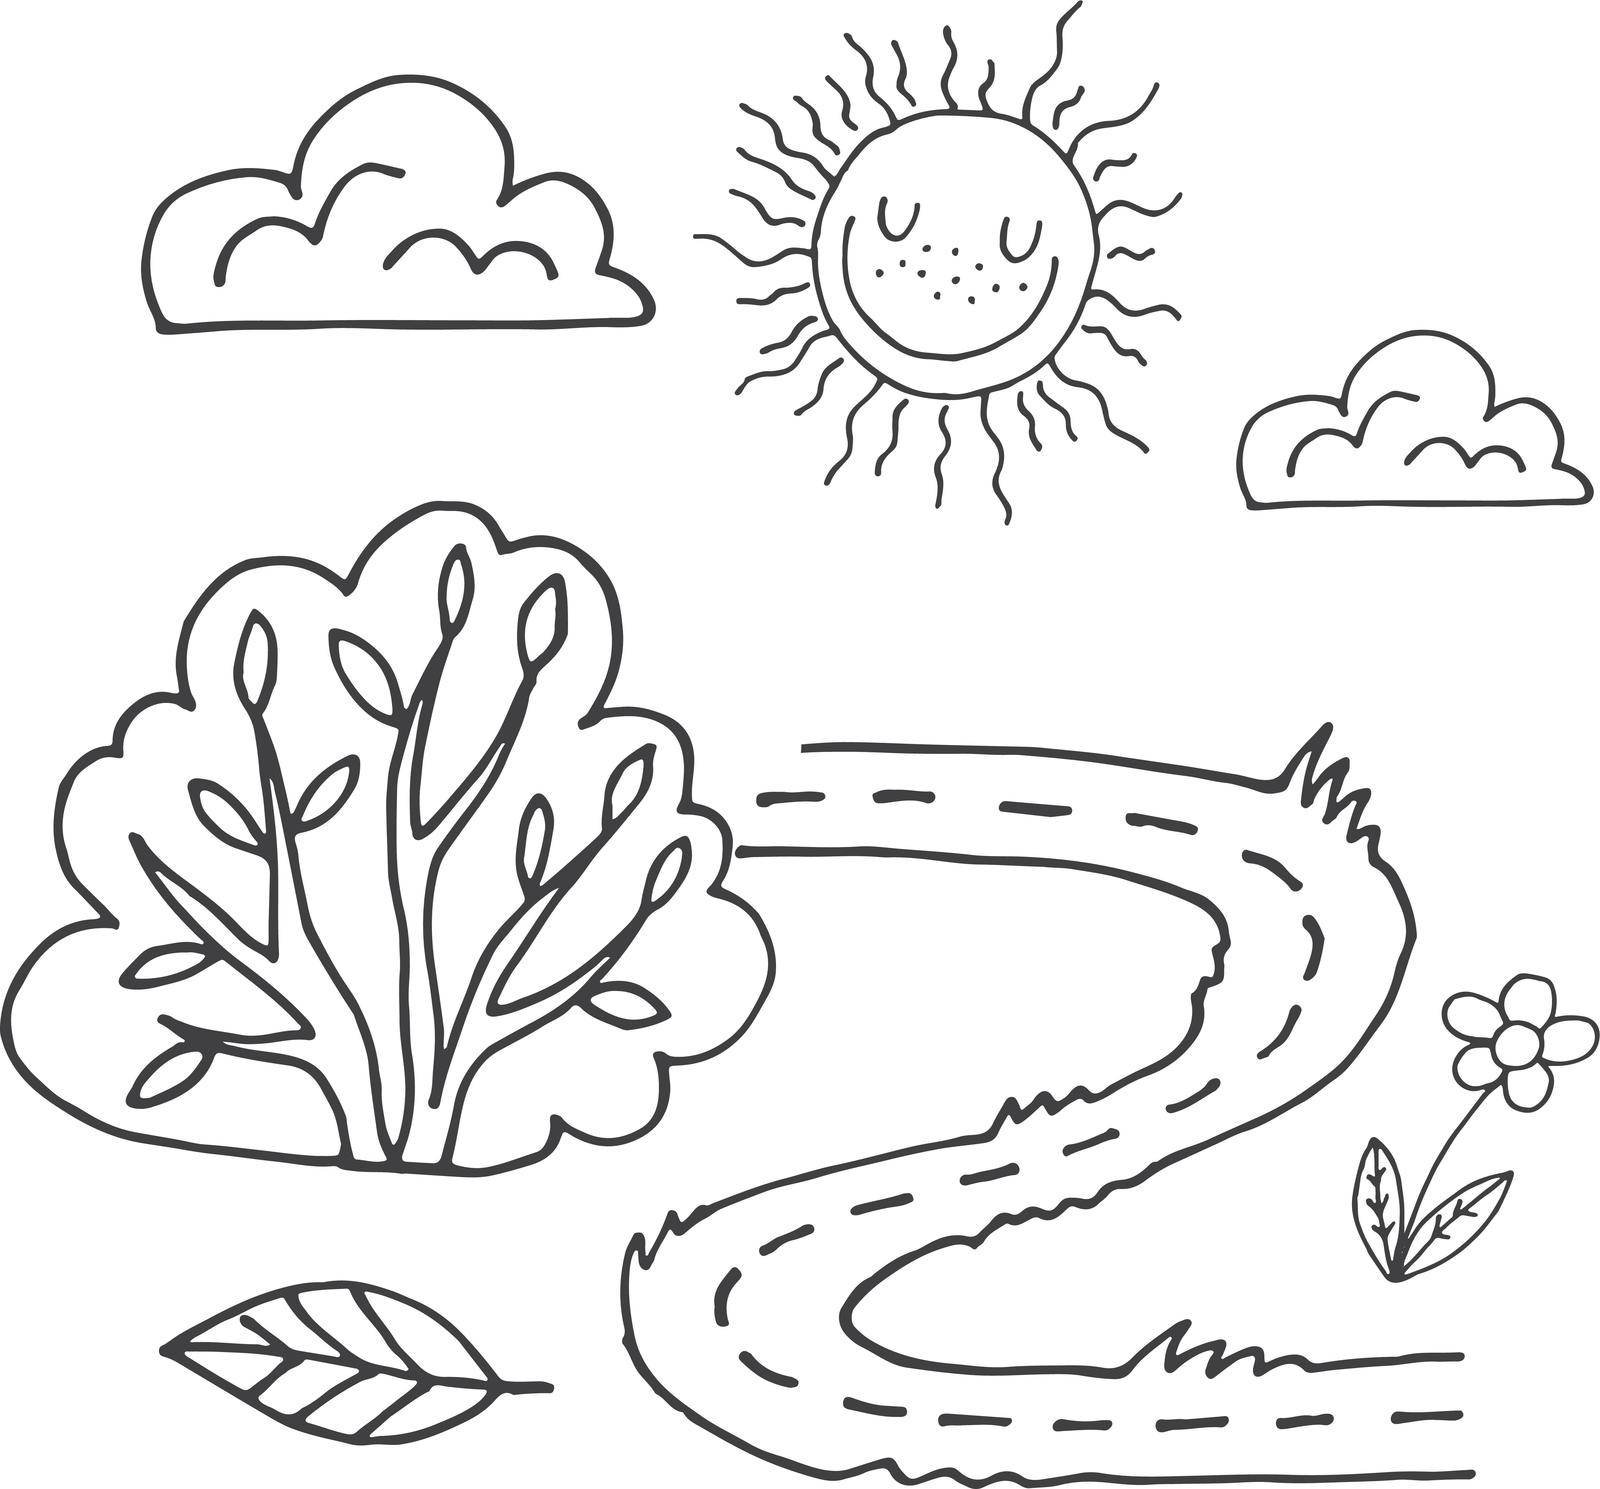 Summer nature child drawing. Coloring book landscape page by ONYXprj